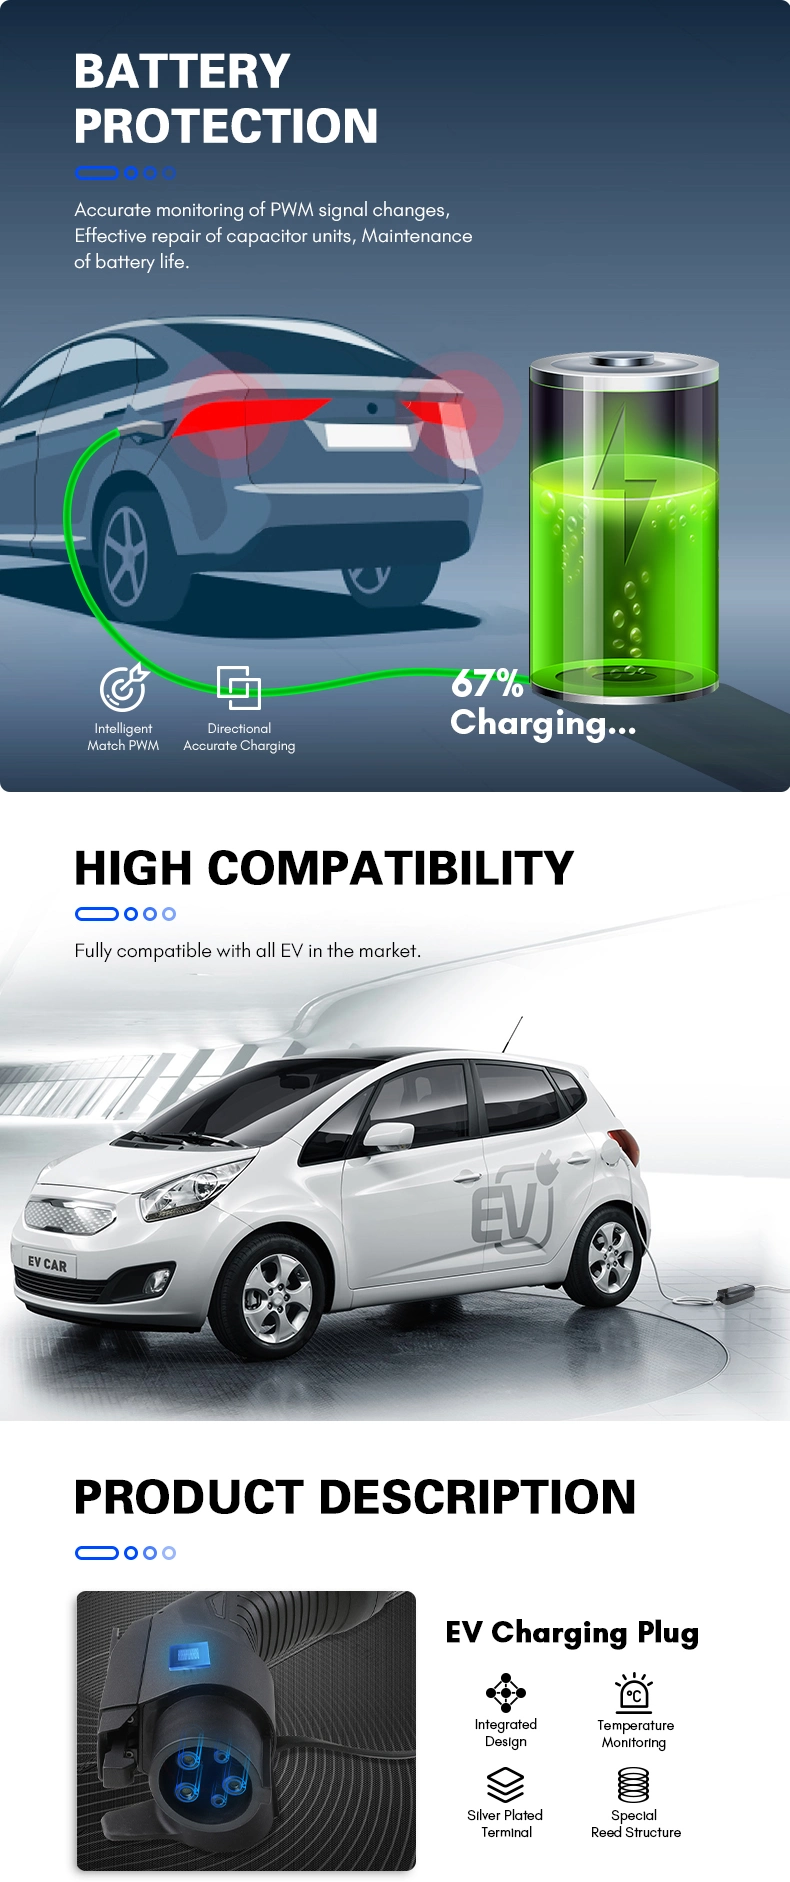 Type 2 Portable EV Home Charger for Mode 2 EV Charging